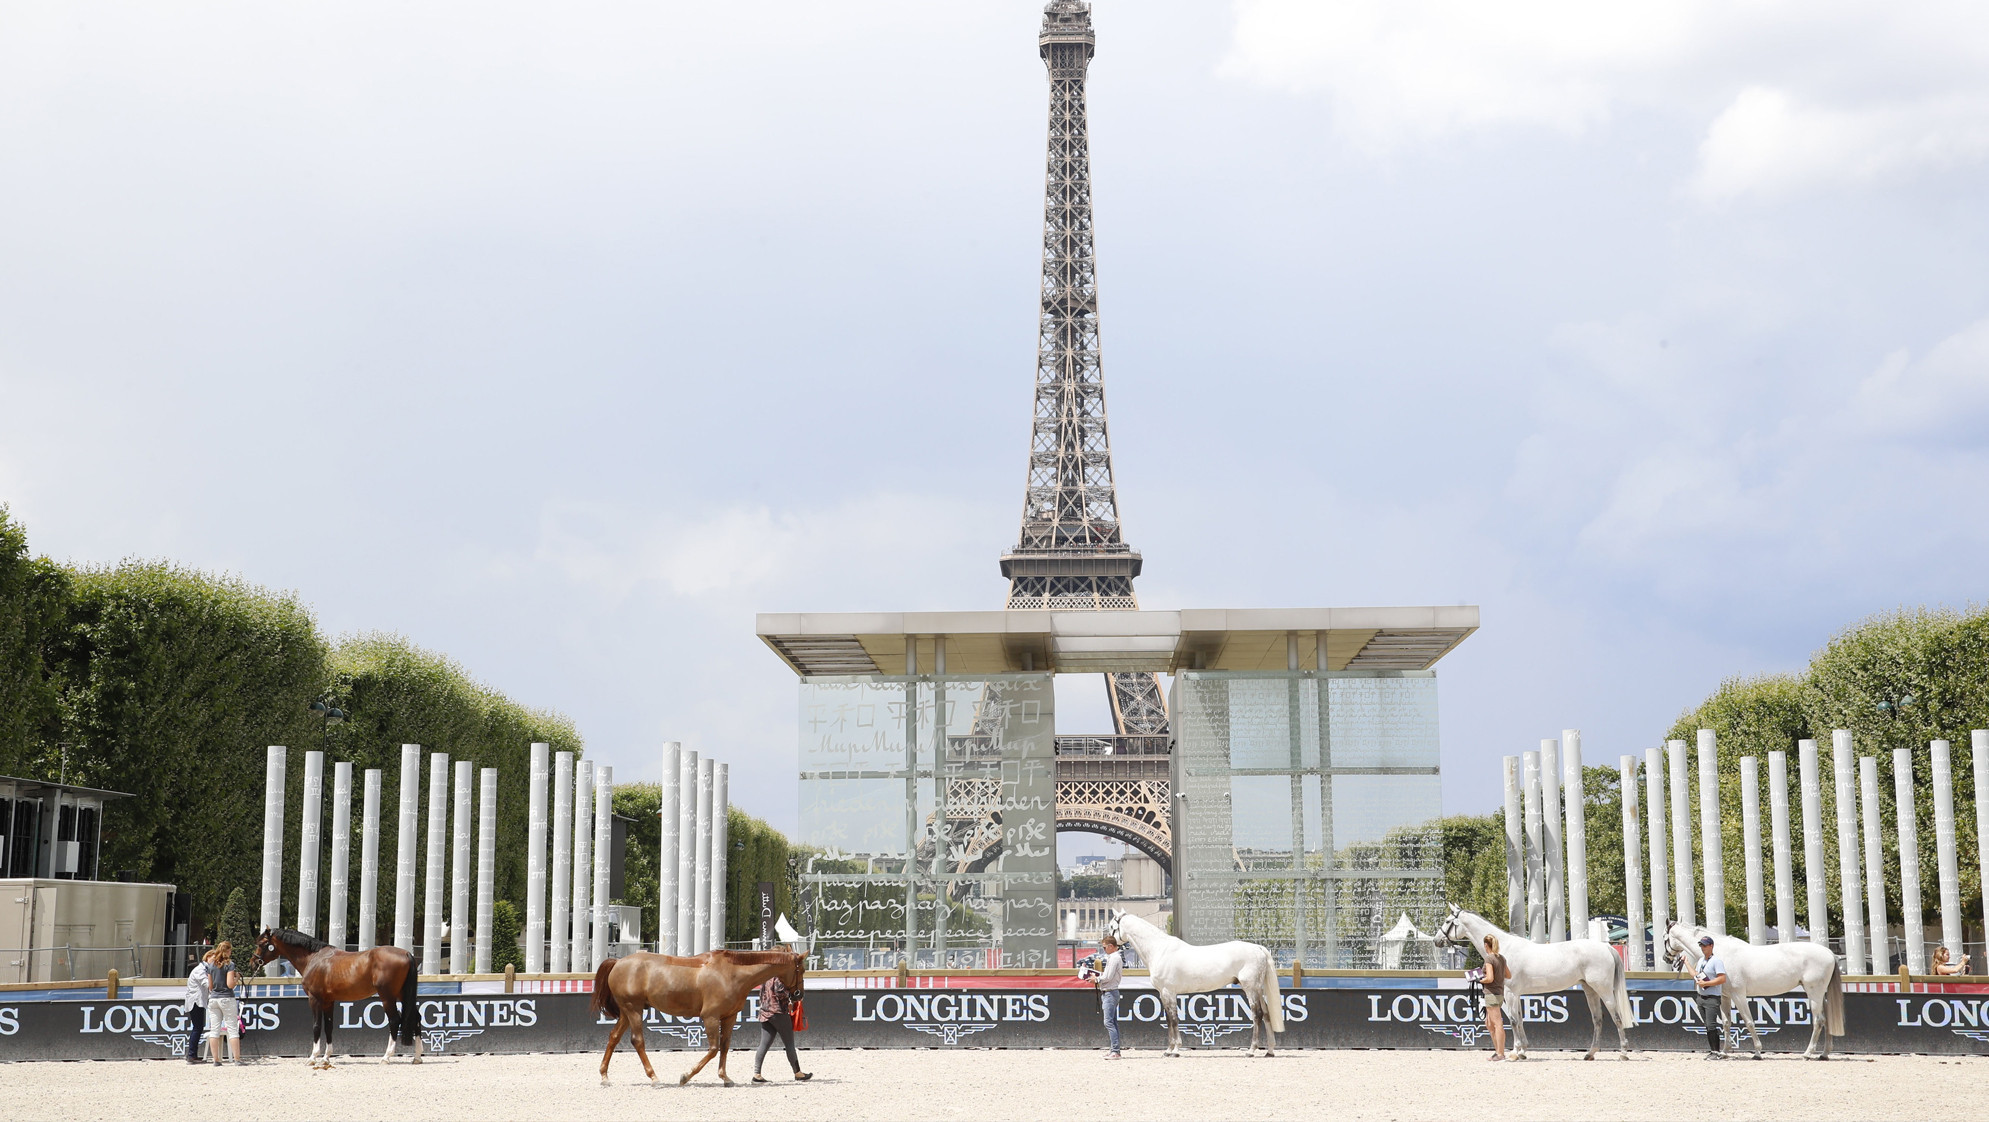 Competition will be held under the shadow of the Eiffel Tower ©LGCT/Stefano Grasso